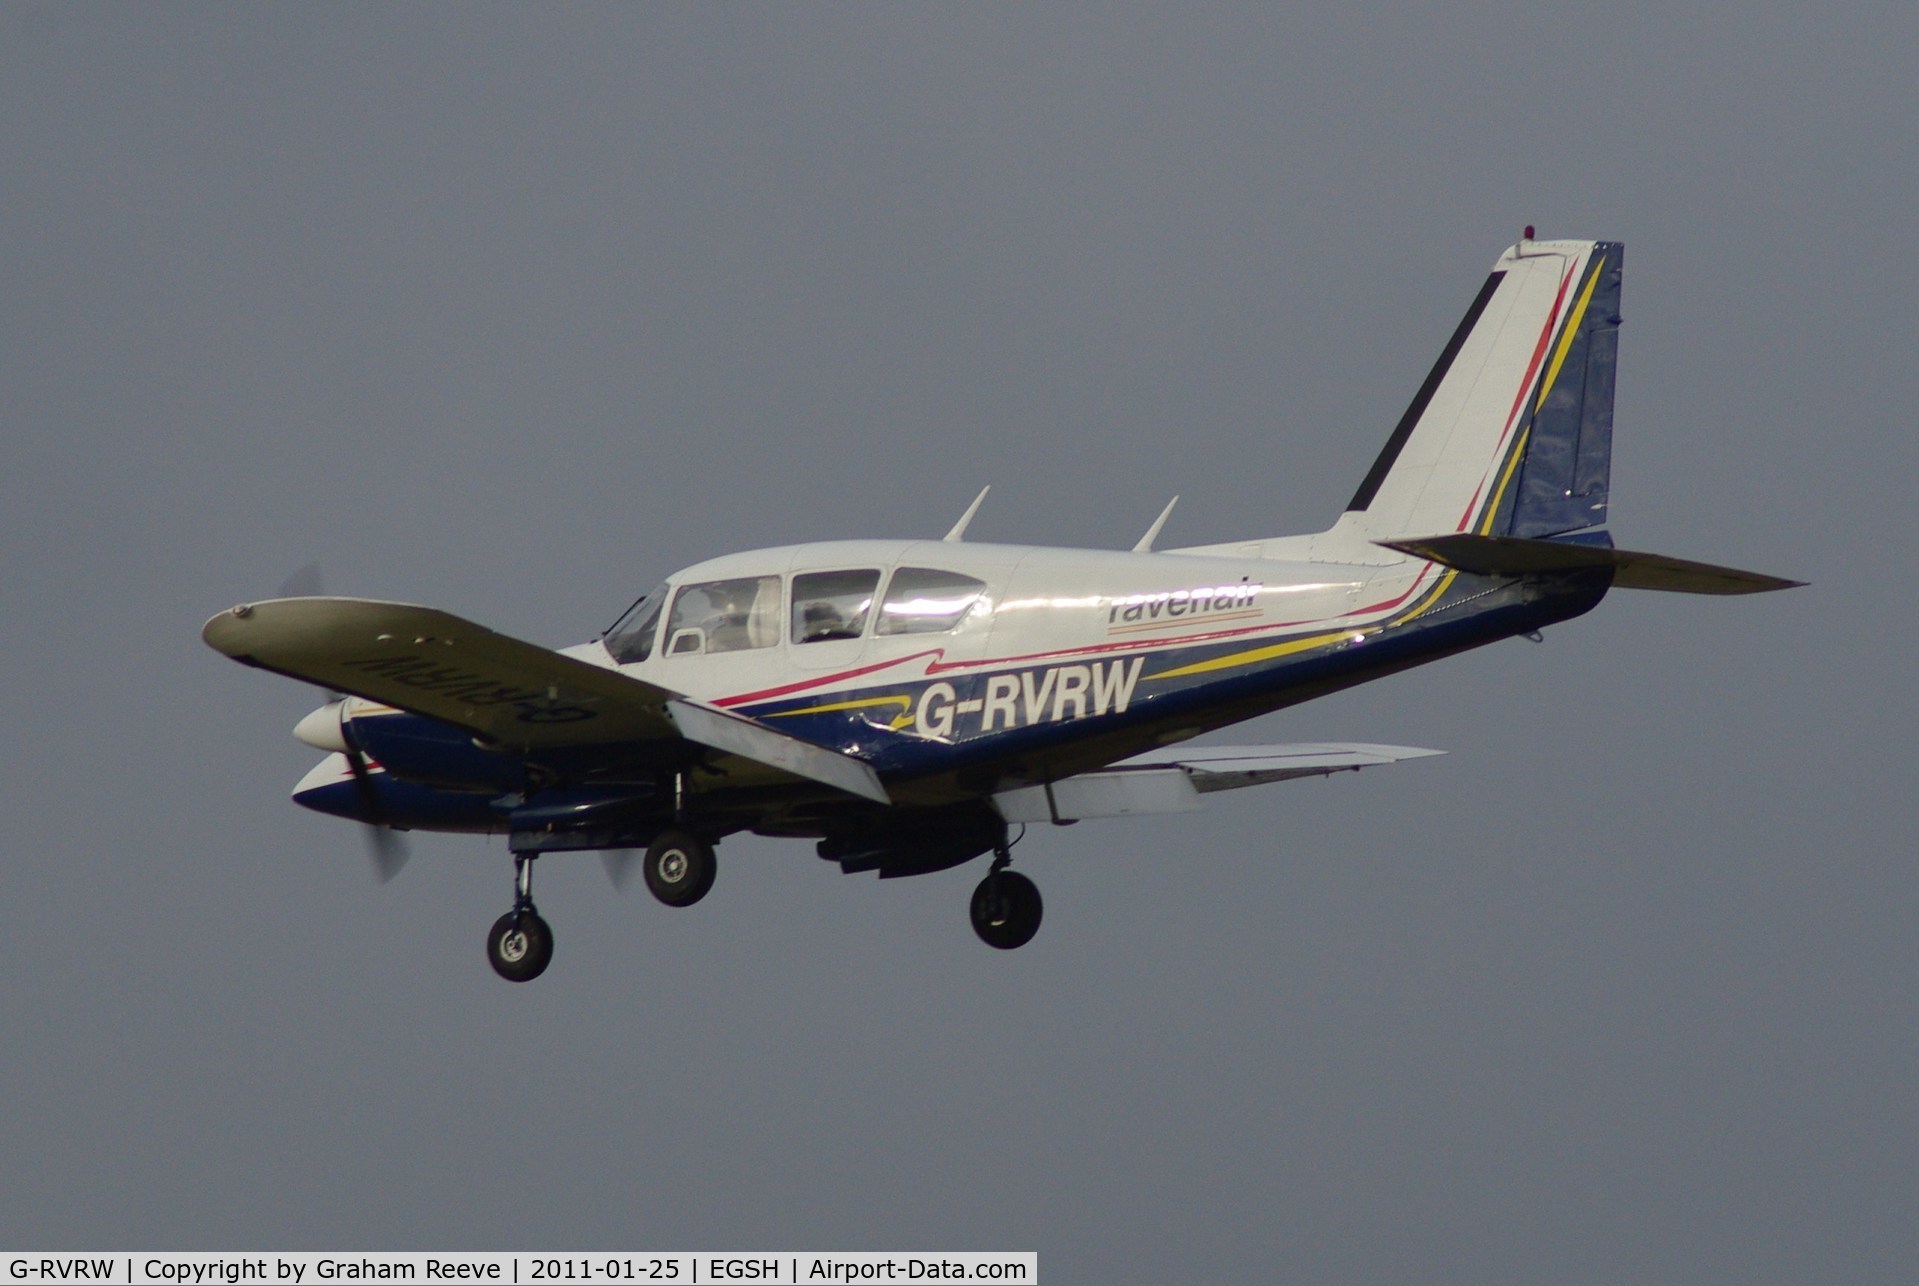 G-RVRW, 1973 Piper PA-23-250 Aztec E C/N 27-7305045, About to land at Norwich.